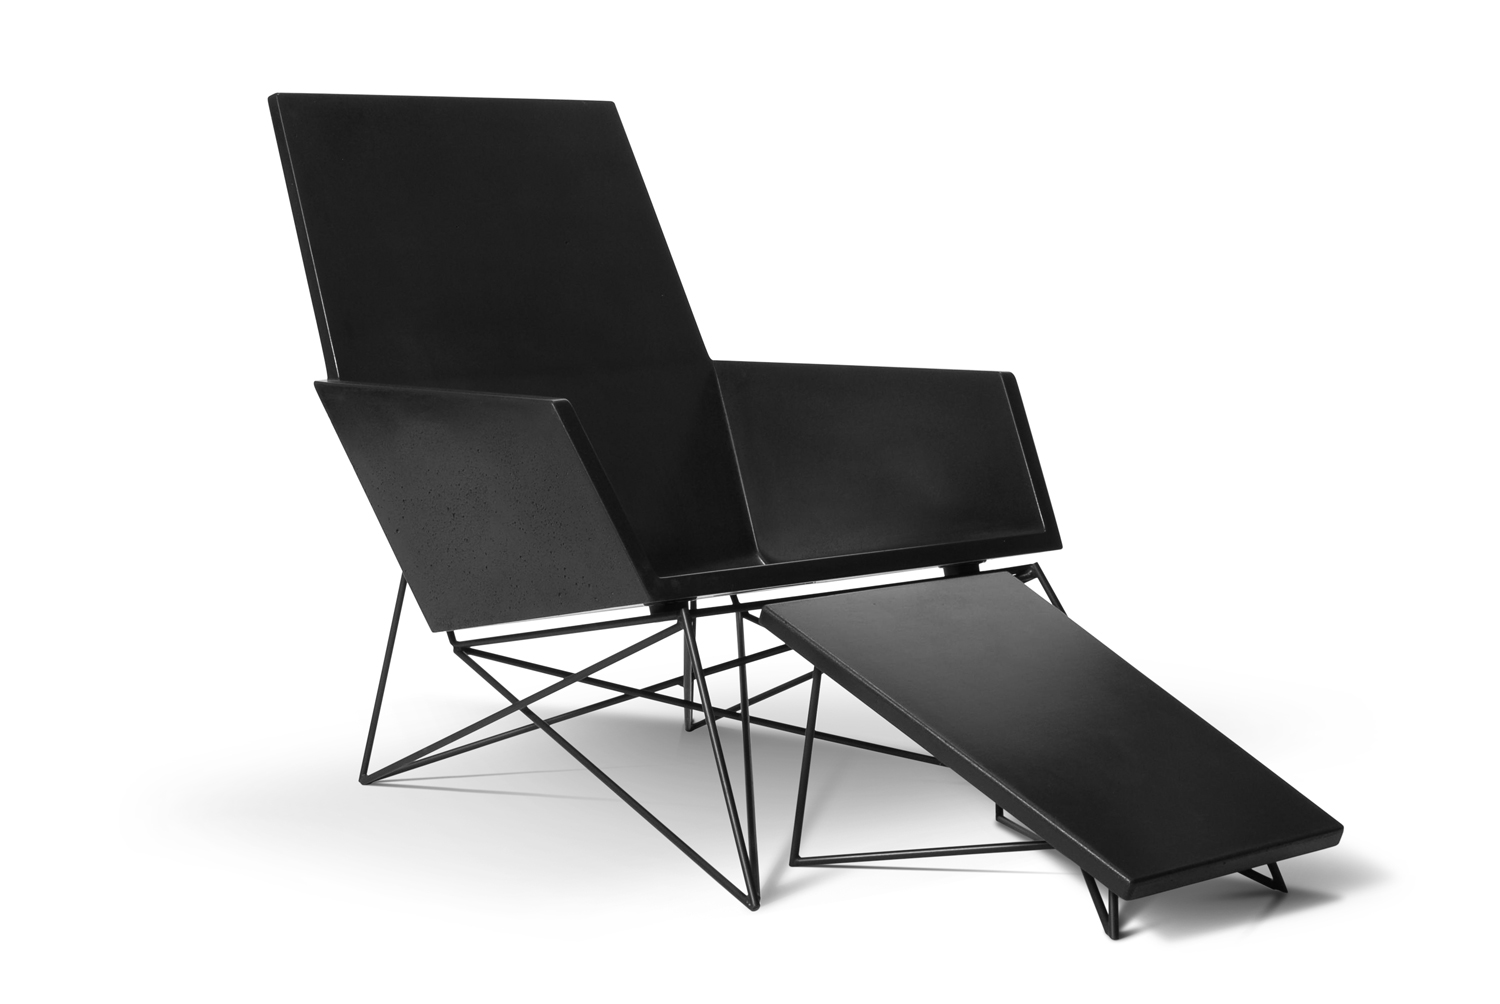 Hard Goods Concrete and Steel Modern Muskoka Outdoor Chair Carbon Edition with Ottoman